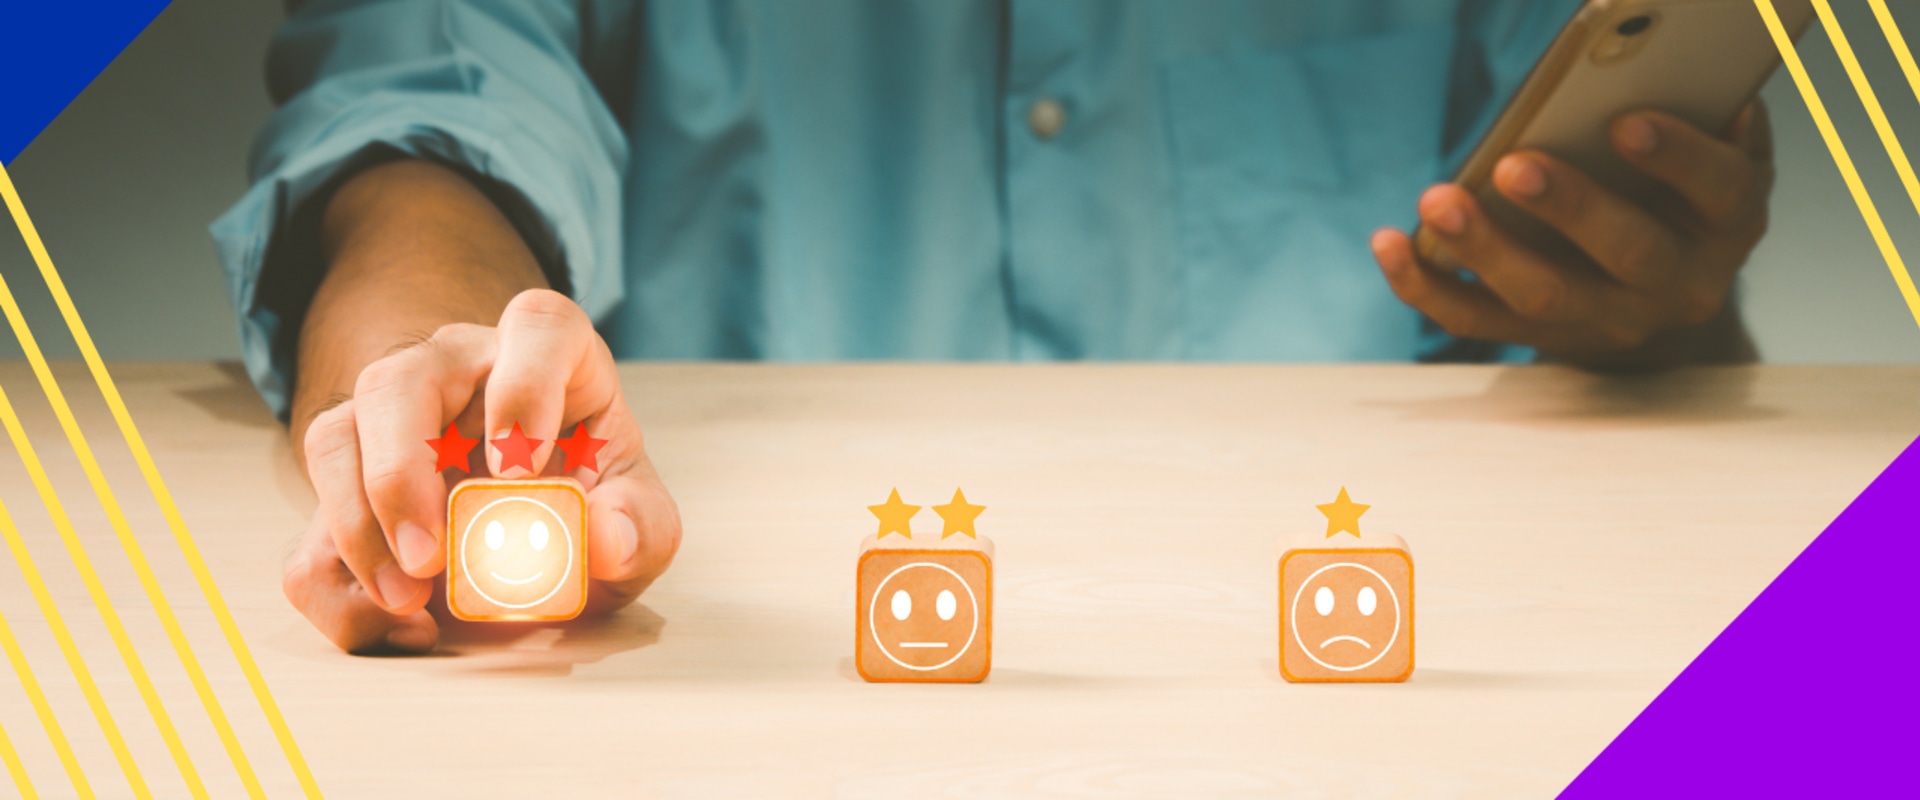 4 Proven Strategies to Improve Customer Satisfaction and Retention